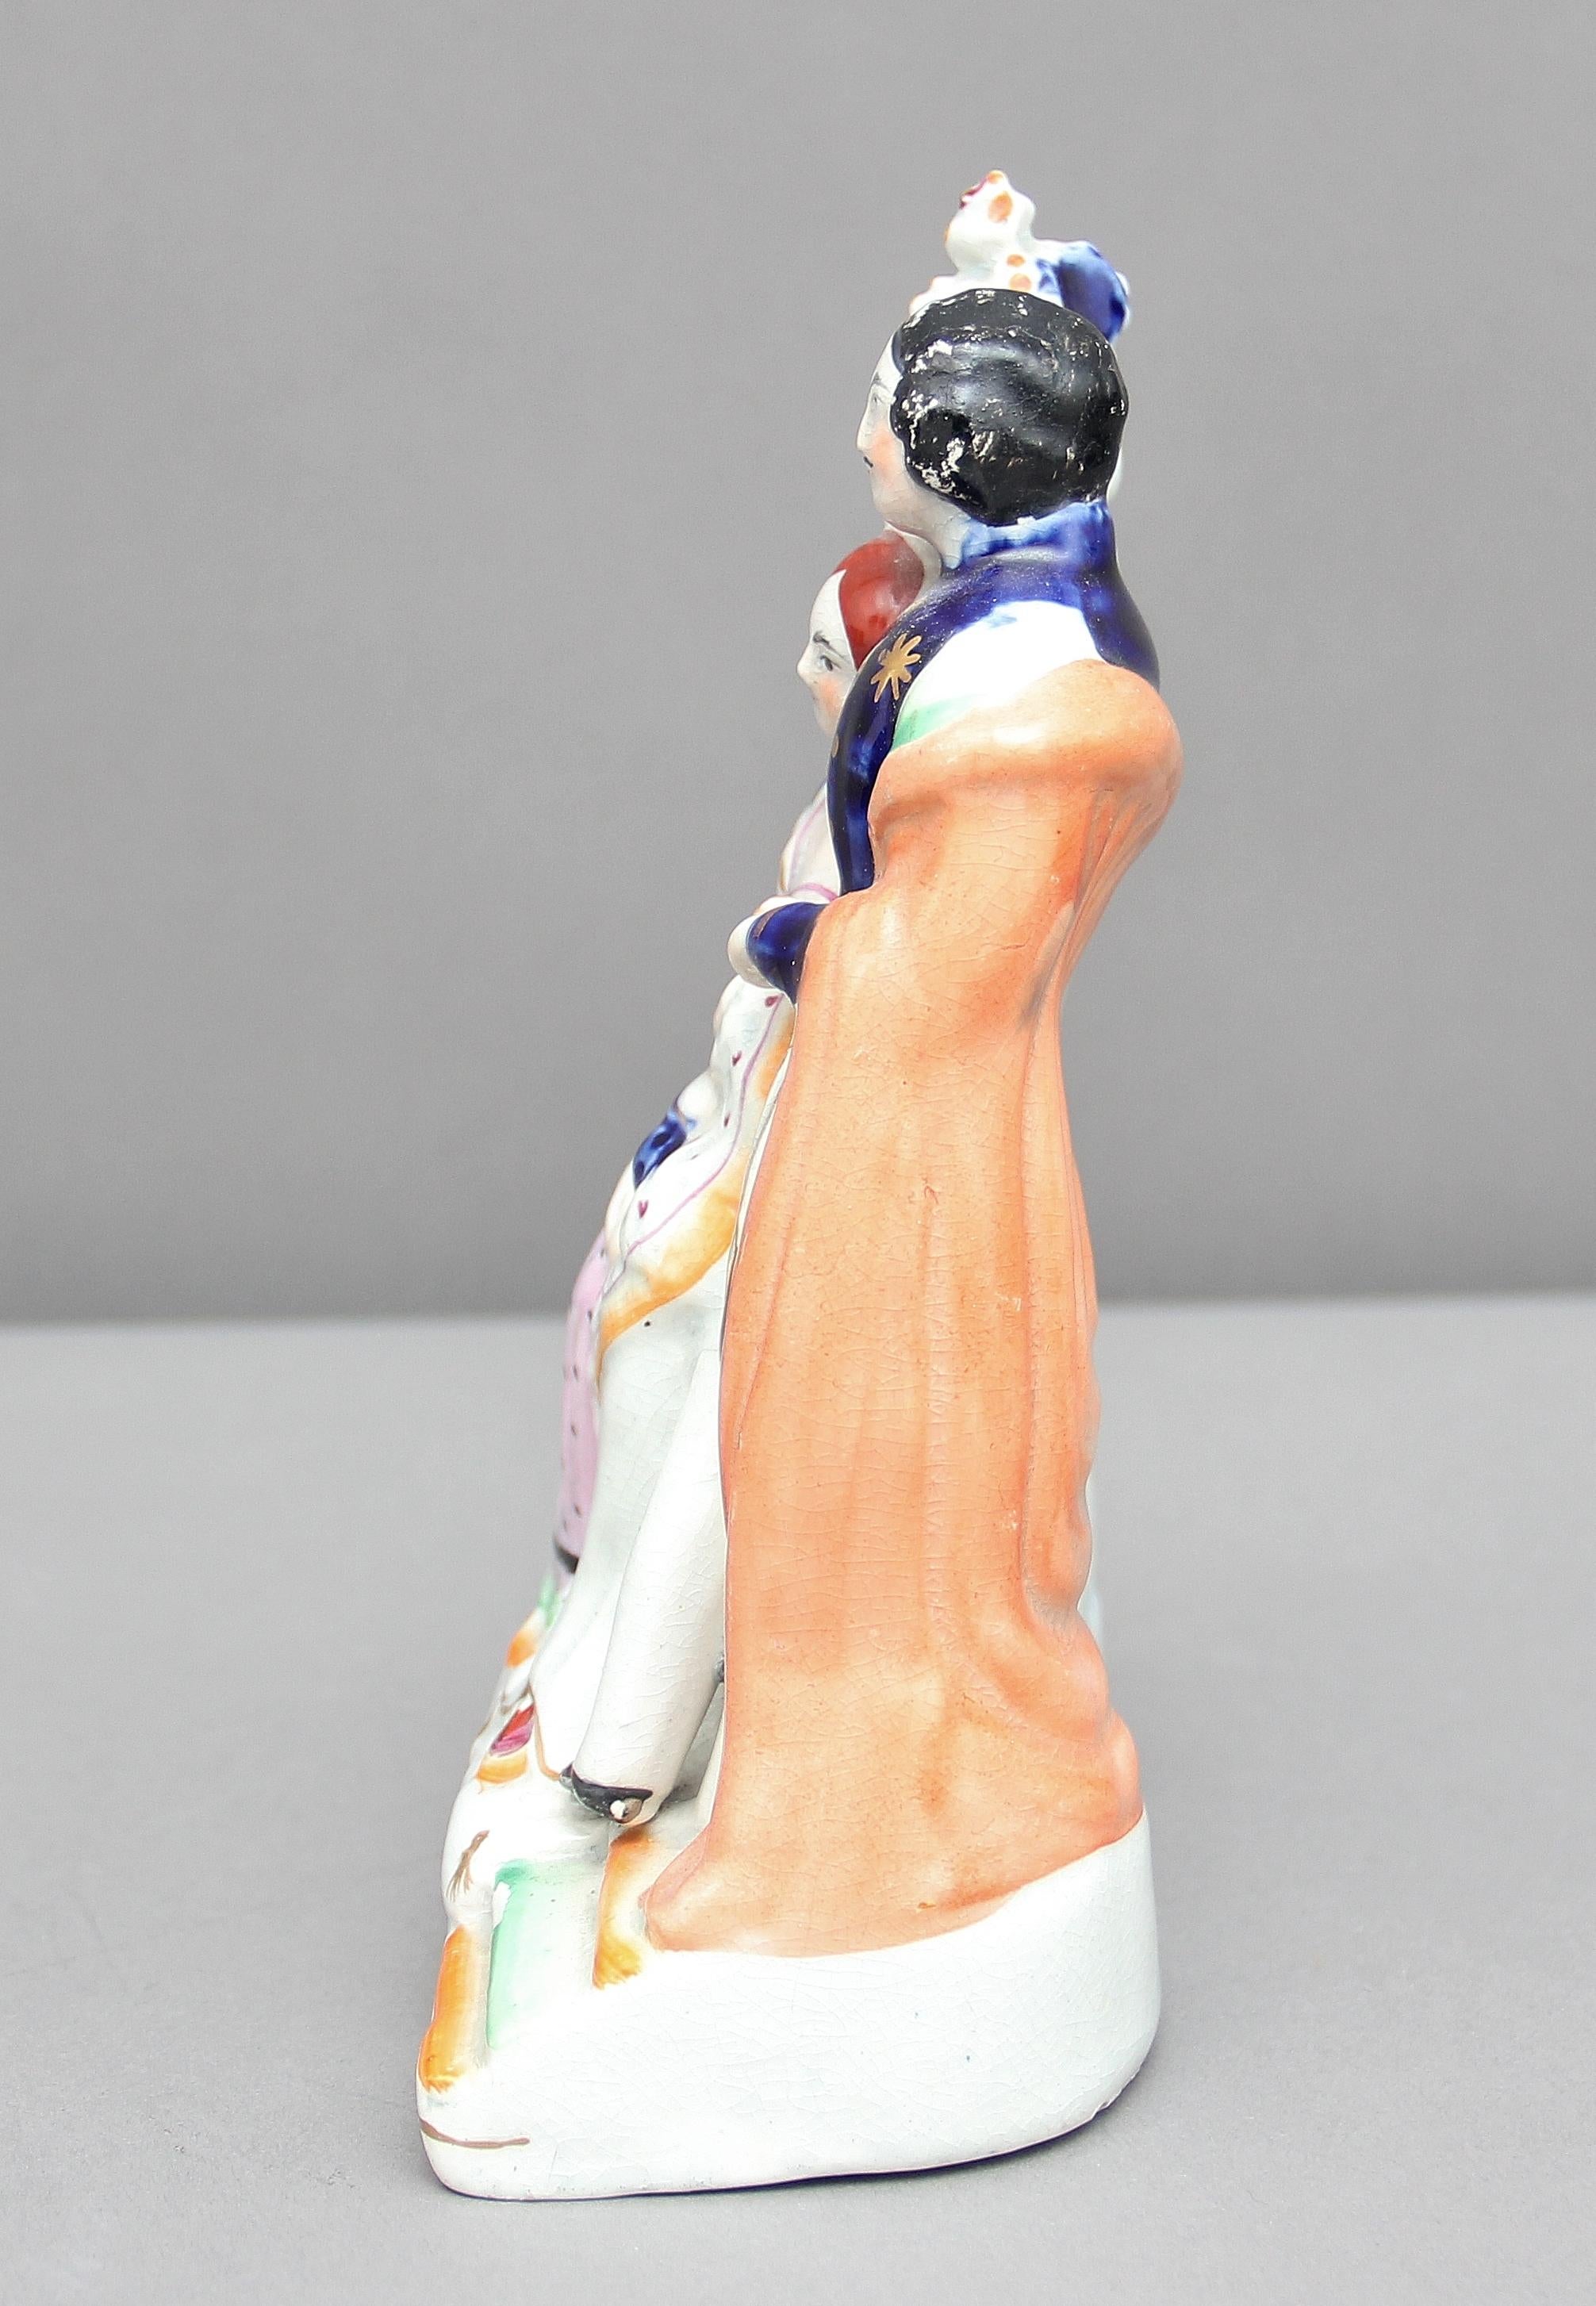 19th century Staffordshire figure group of Queen Victoria and Prince Albert, Queen Victoria is holding a baby. Lovely colors and in very good condition, circa 1840.
 